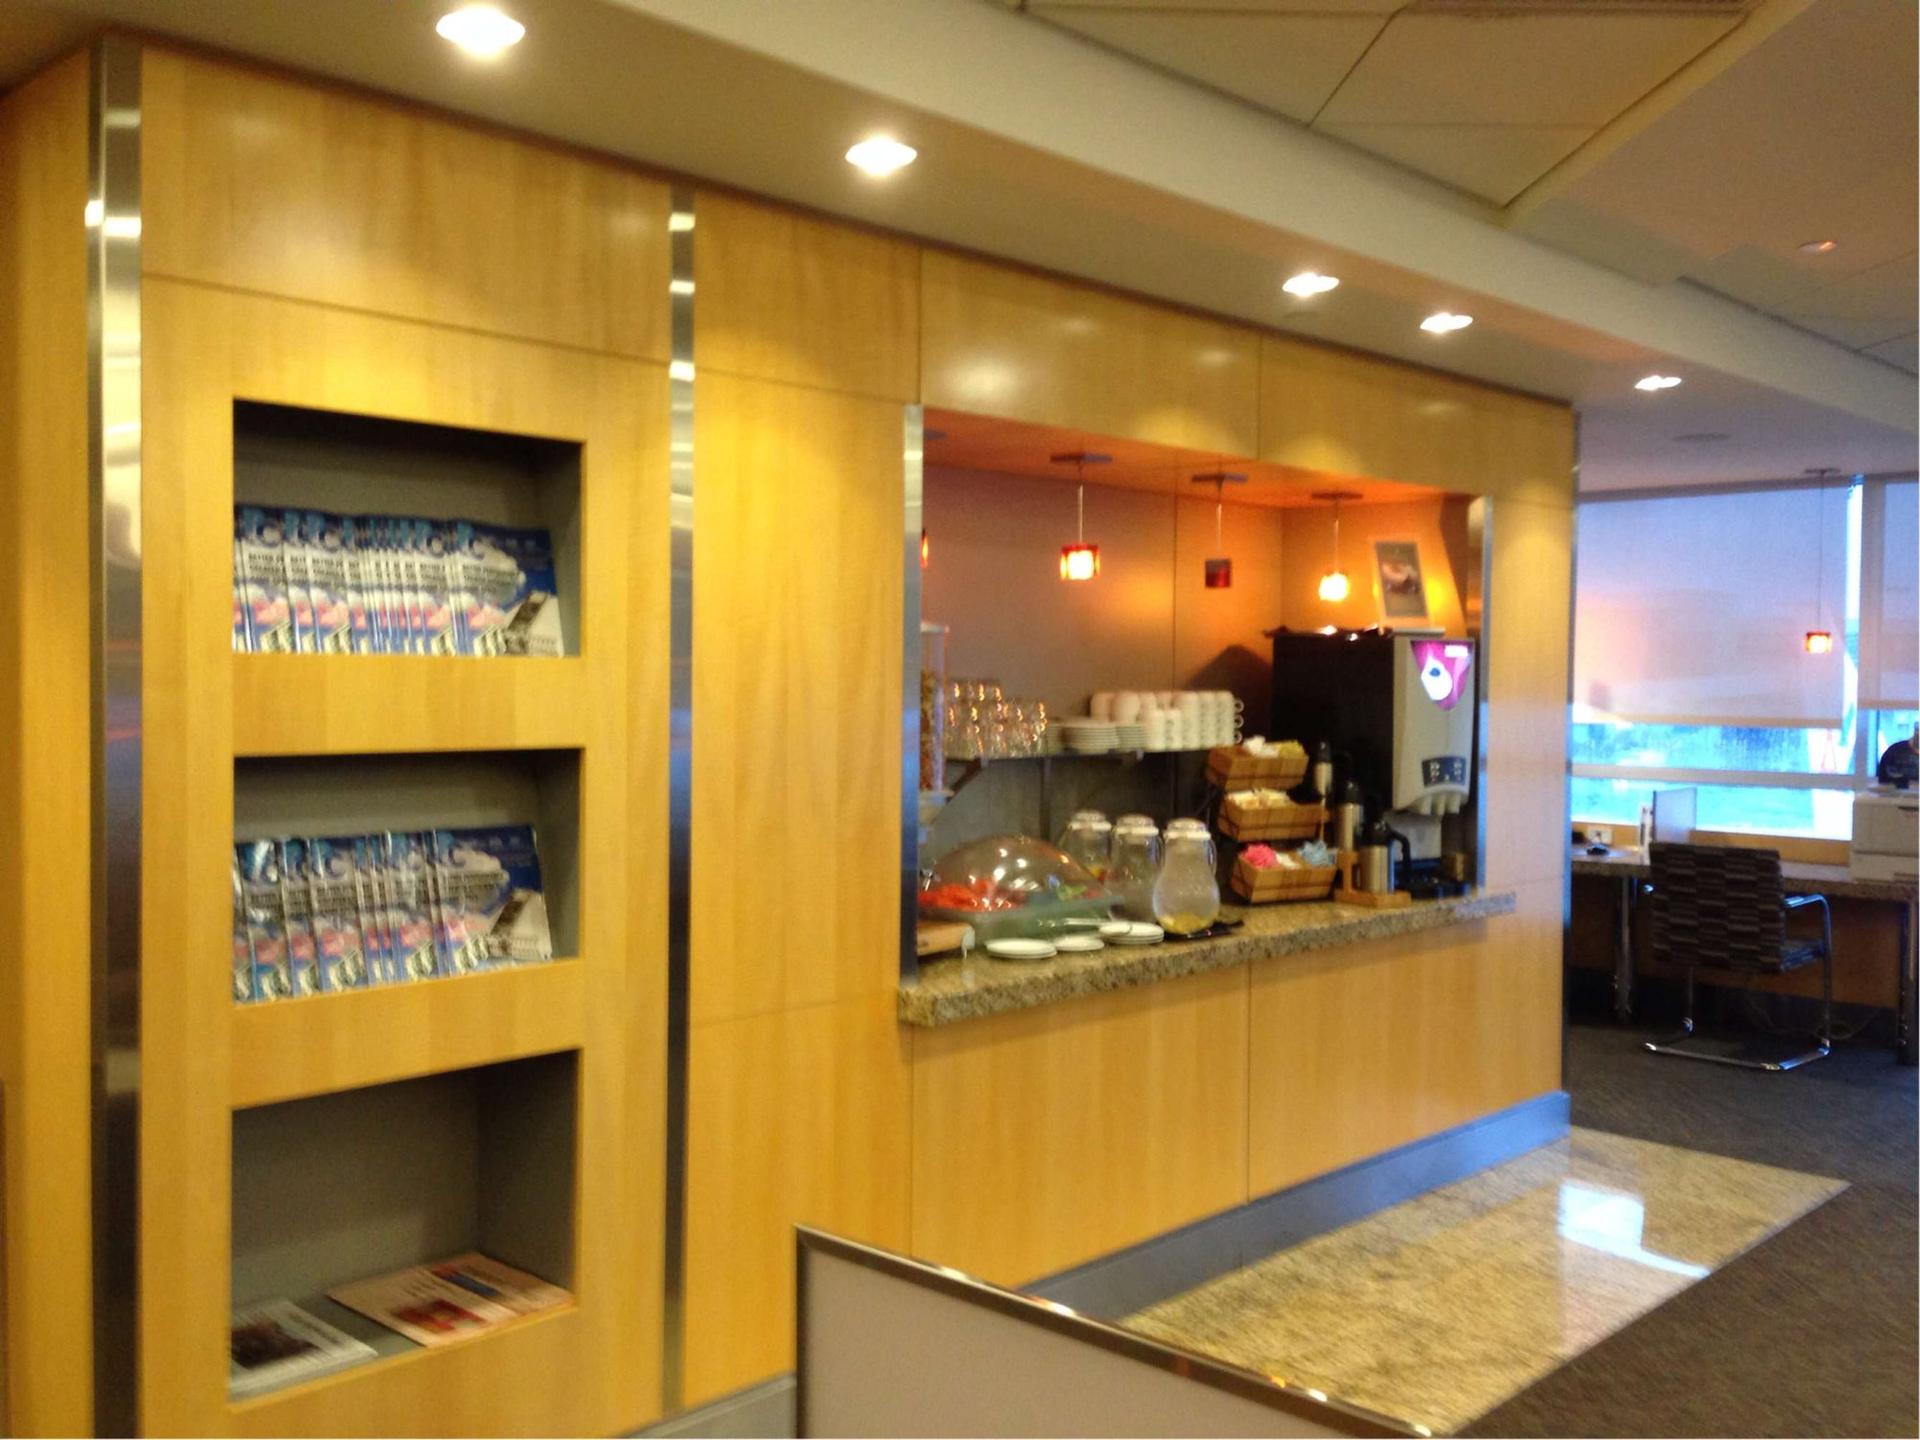 American Airlines Admirals Club image 1 of 25